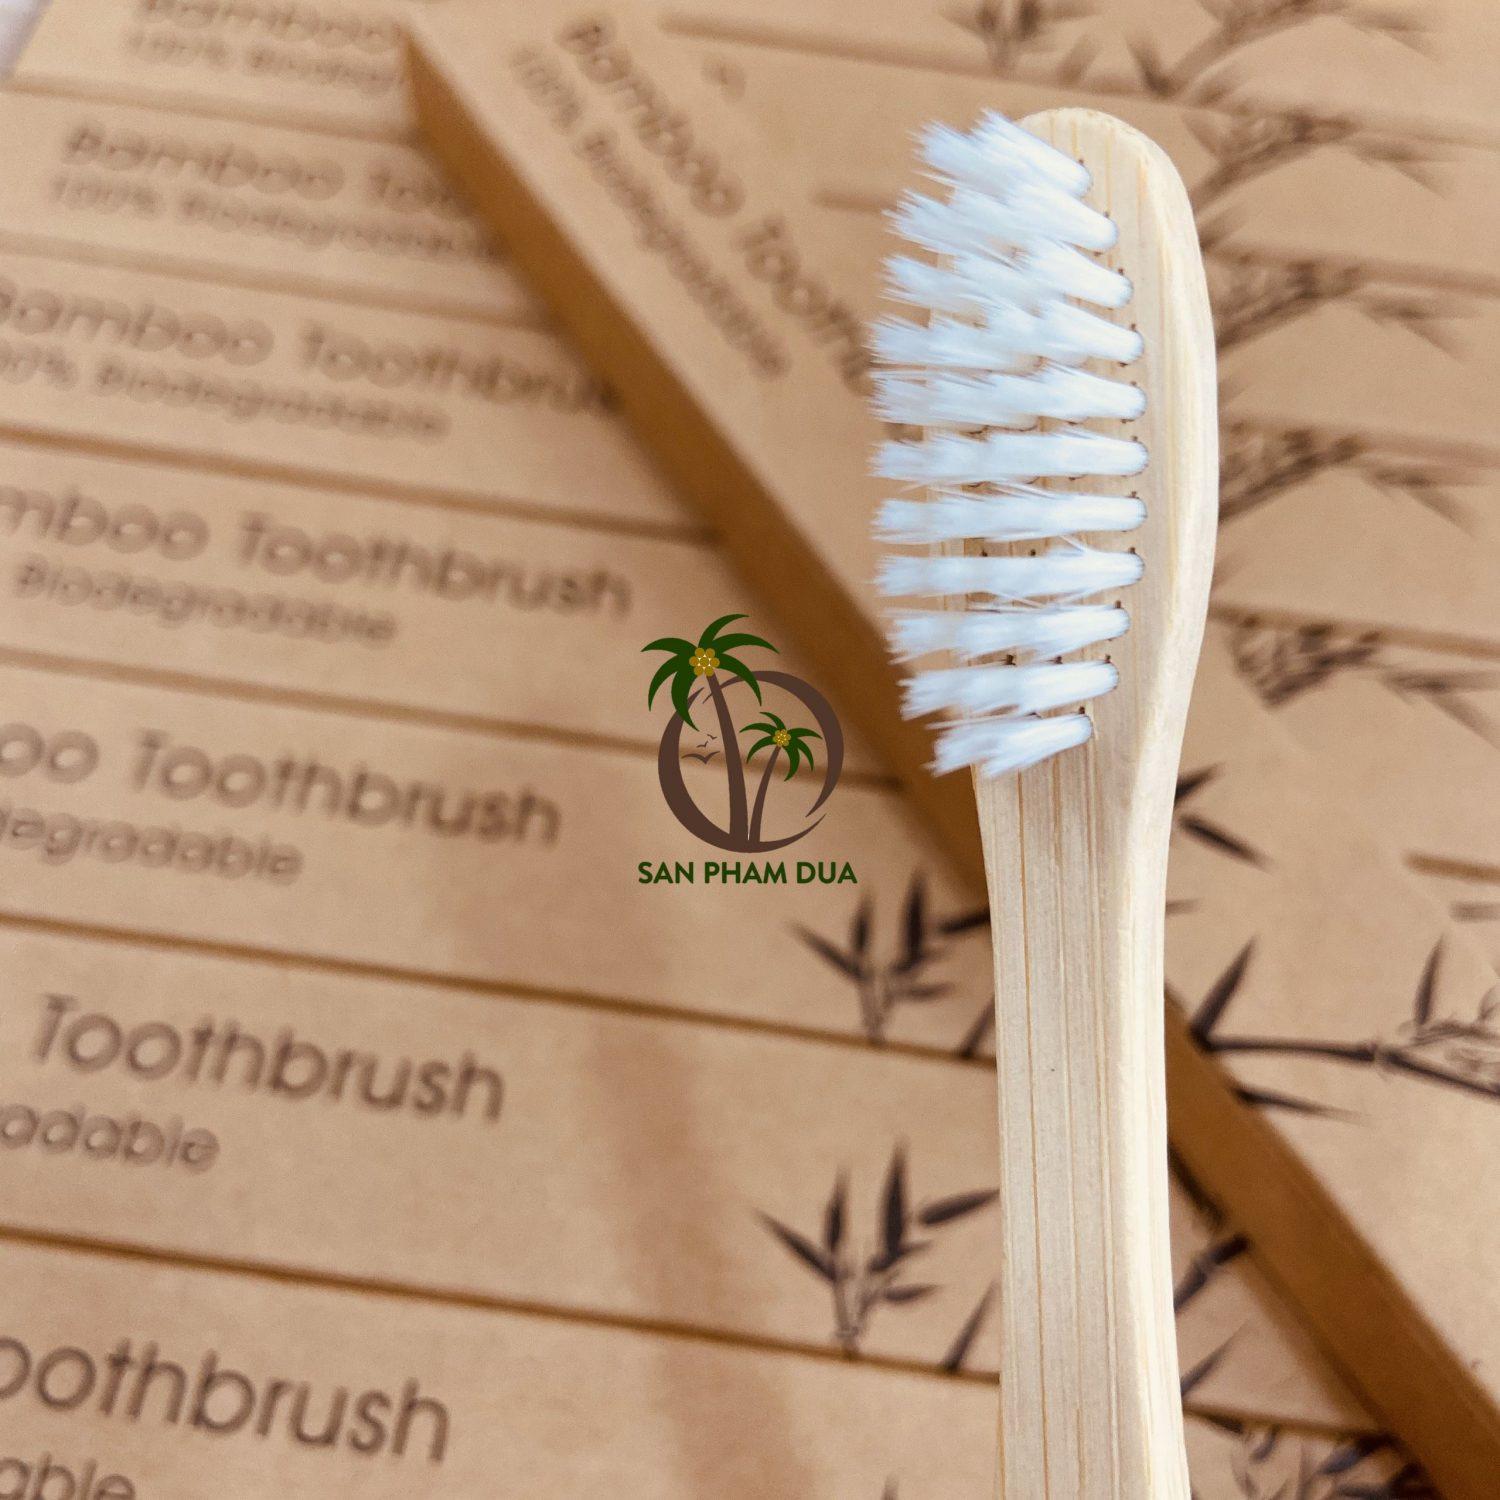 The benefits of bamboo toothbrushes